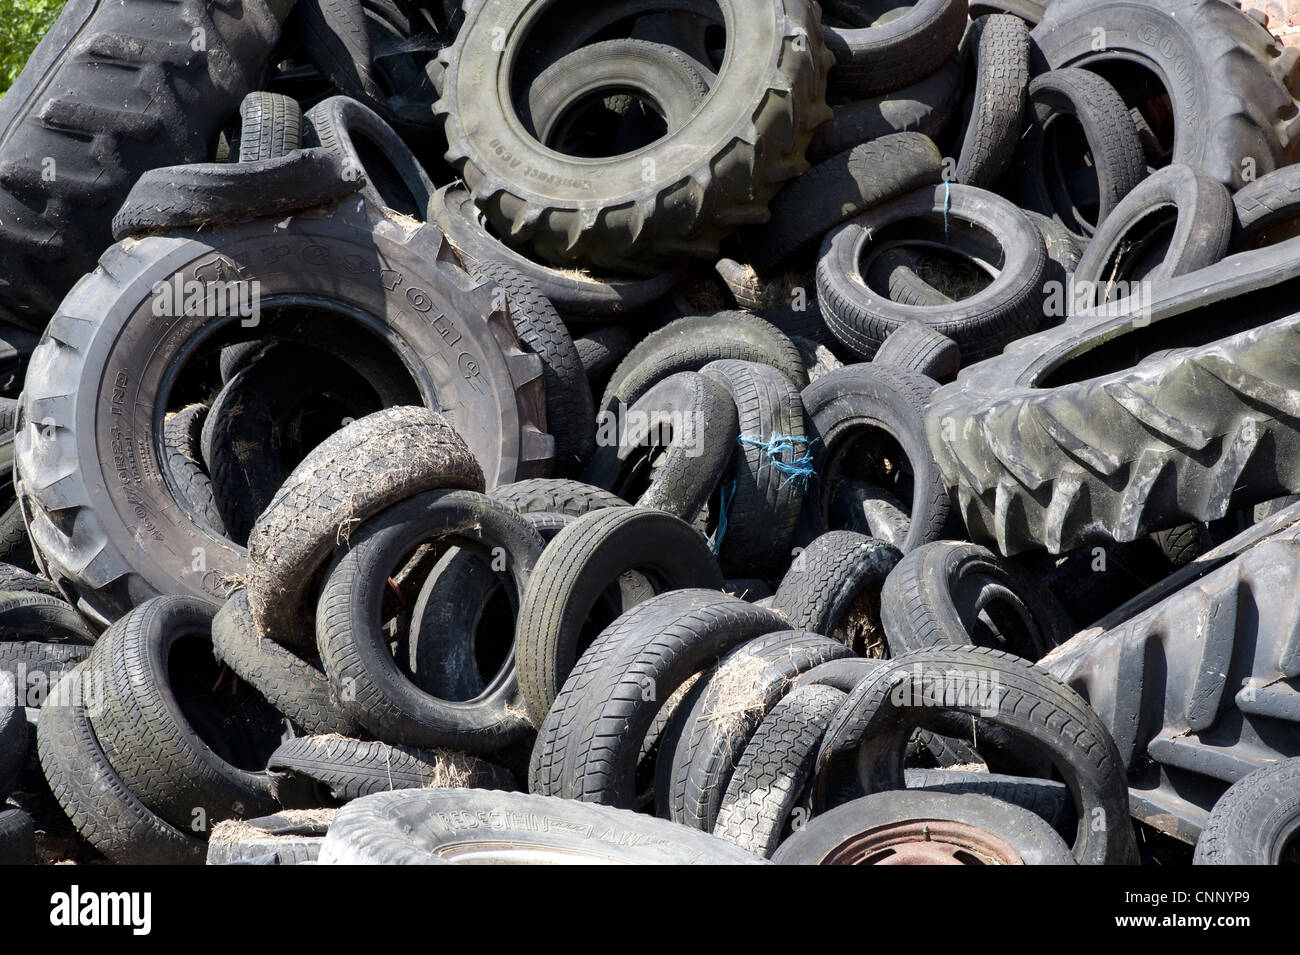 Rubber tyres used to hold sheeting down on silage clamp, England, june Stock Photo